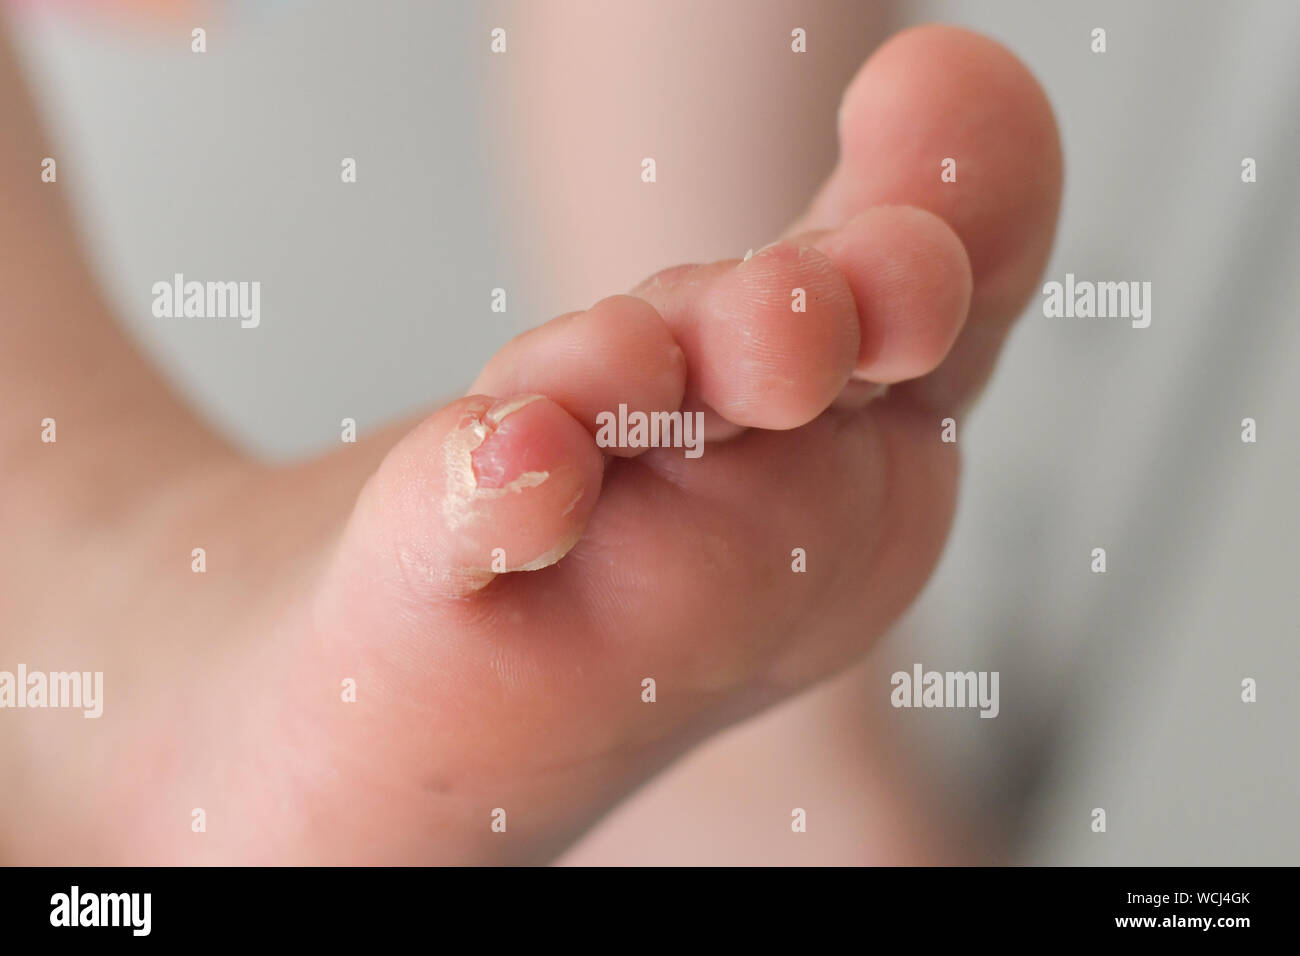 Enterovirus Foot Hand Mouth Skin Peeled Off On The Body Of A Child Cocksackie Virus Stock Photo Alamy